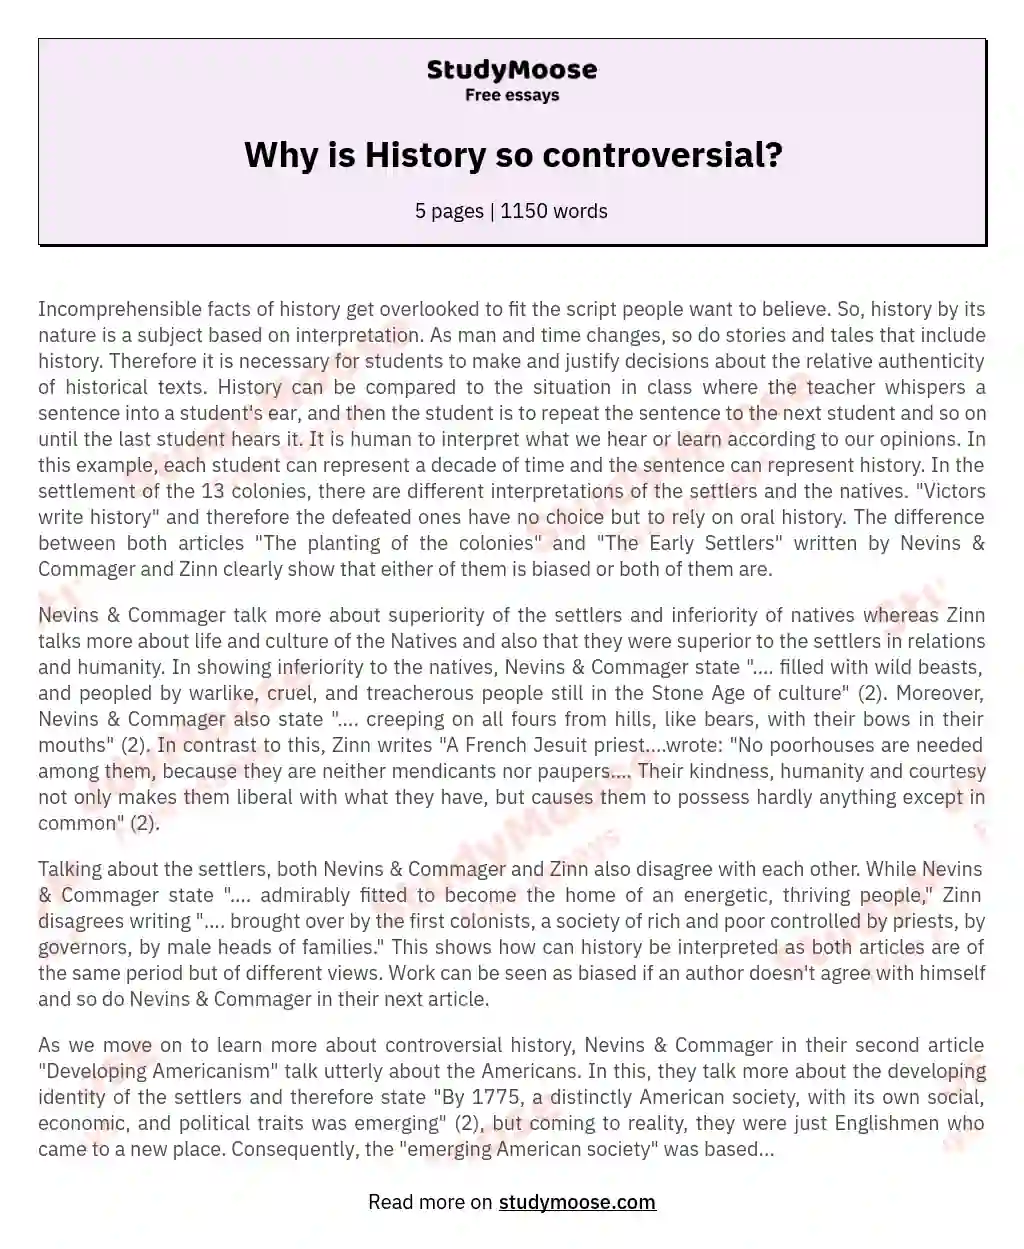 Why is History so controversial?